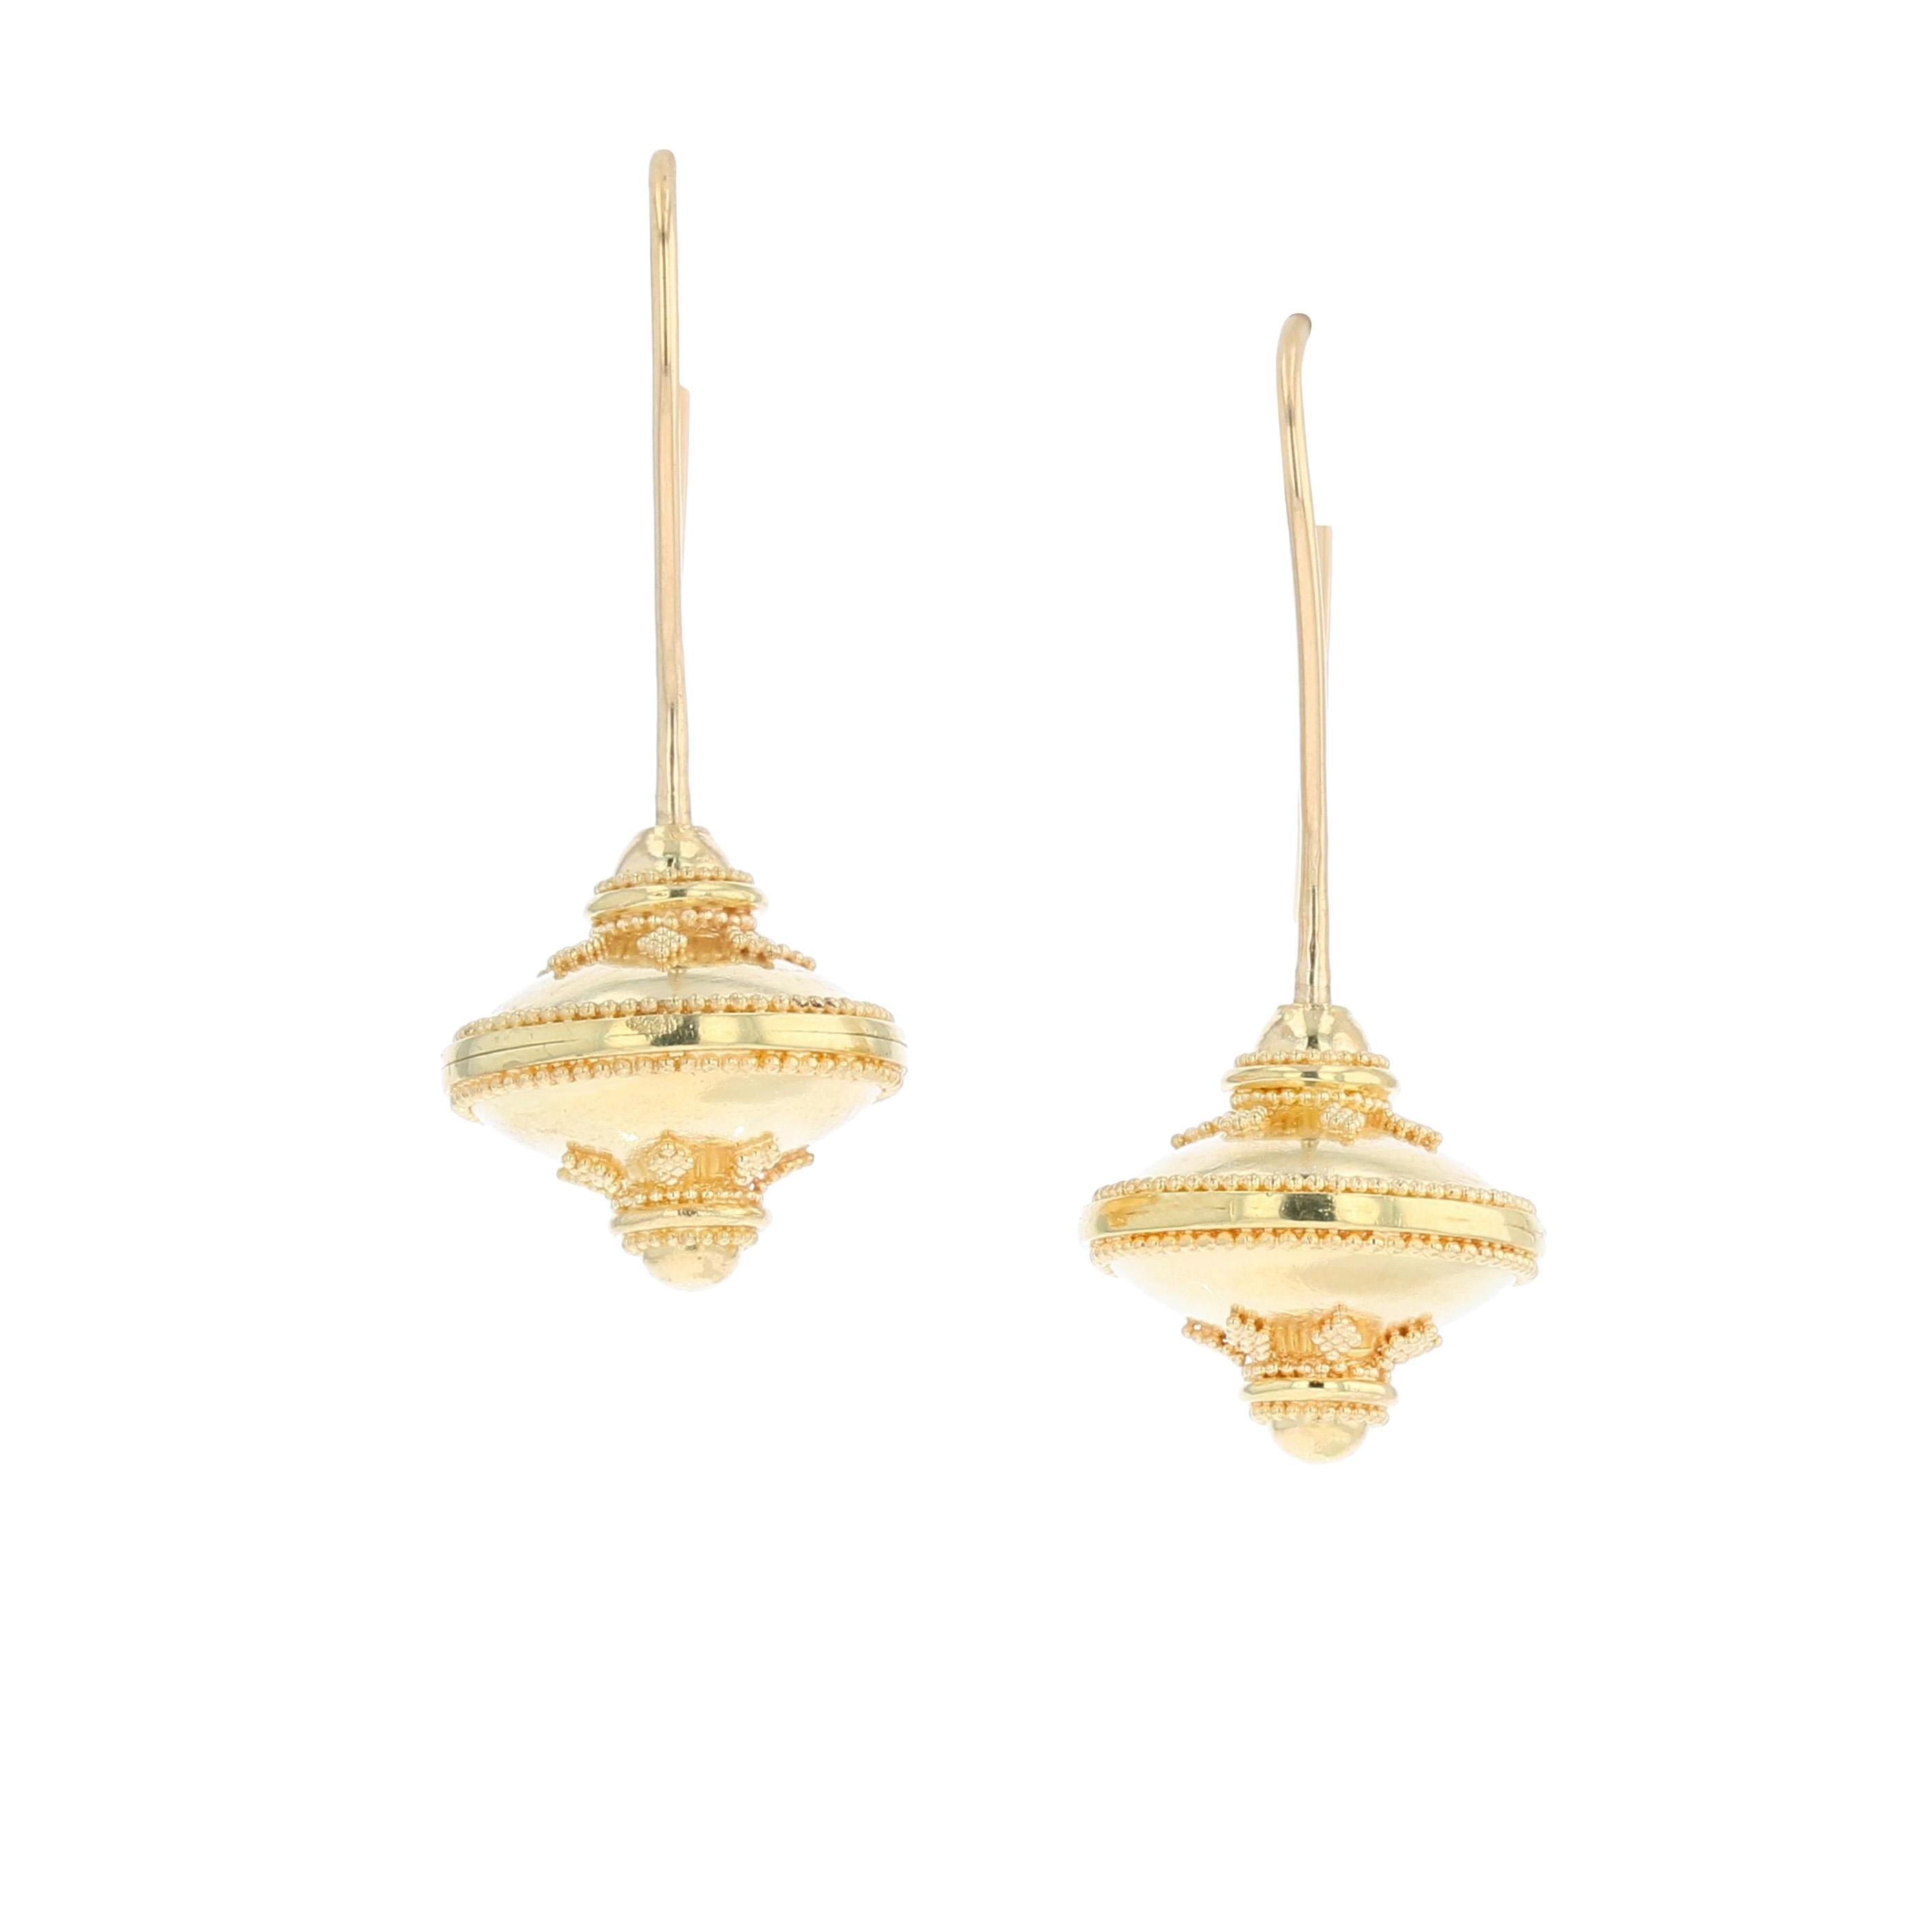 Women's or Men's Kent Raible 18k Gold Small Flying Saucers Drop Dangle Earrings with Granulation